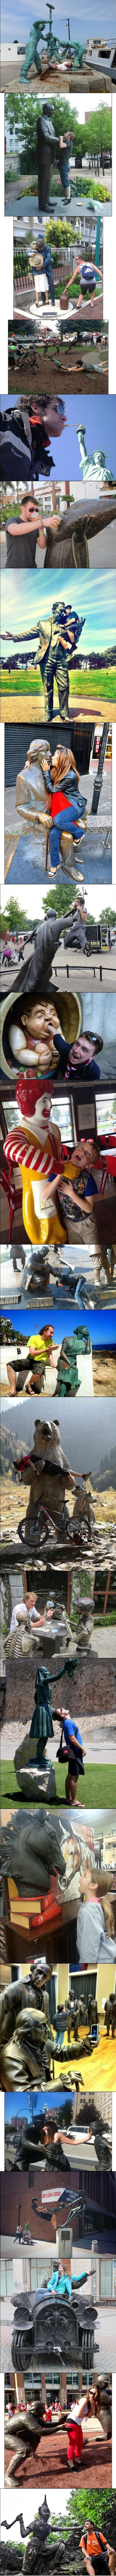 Having fun with statues